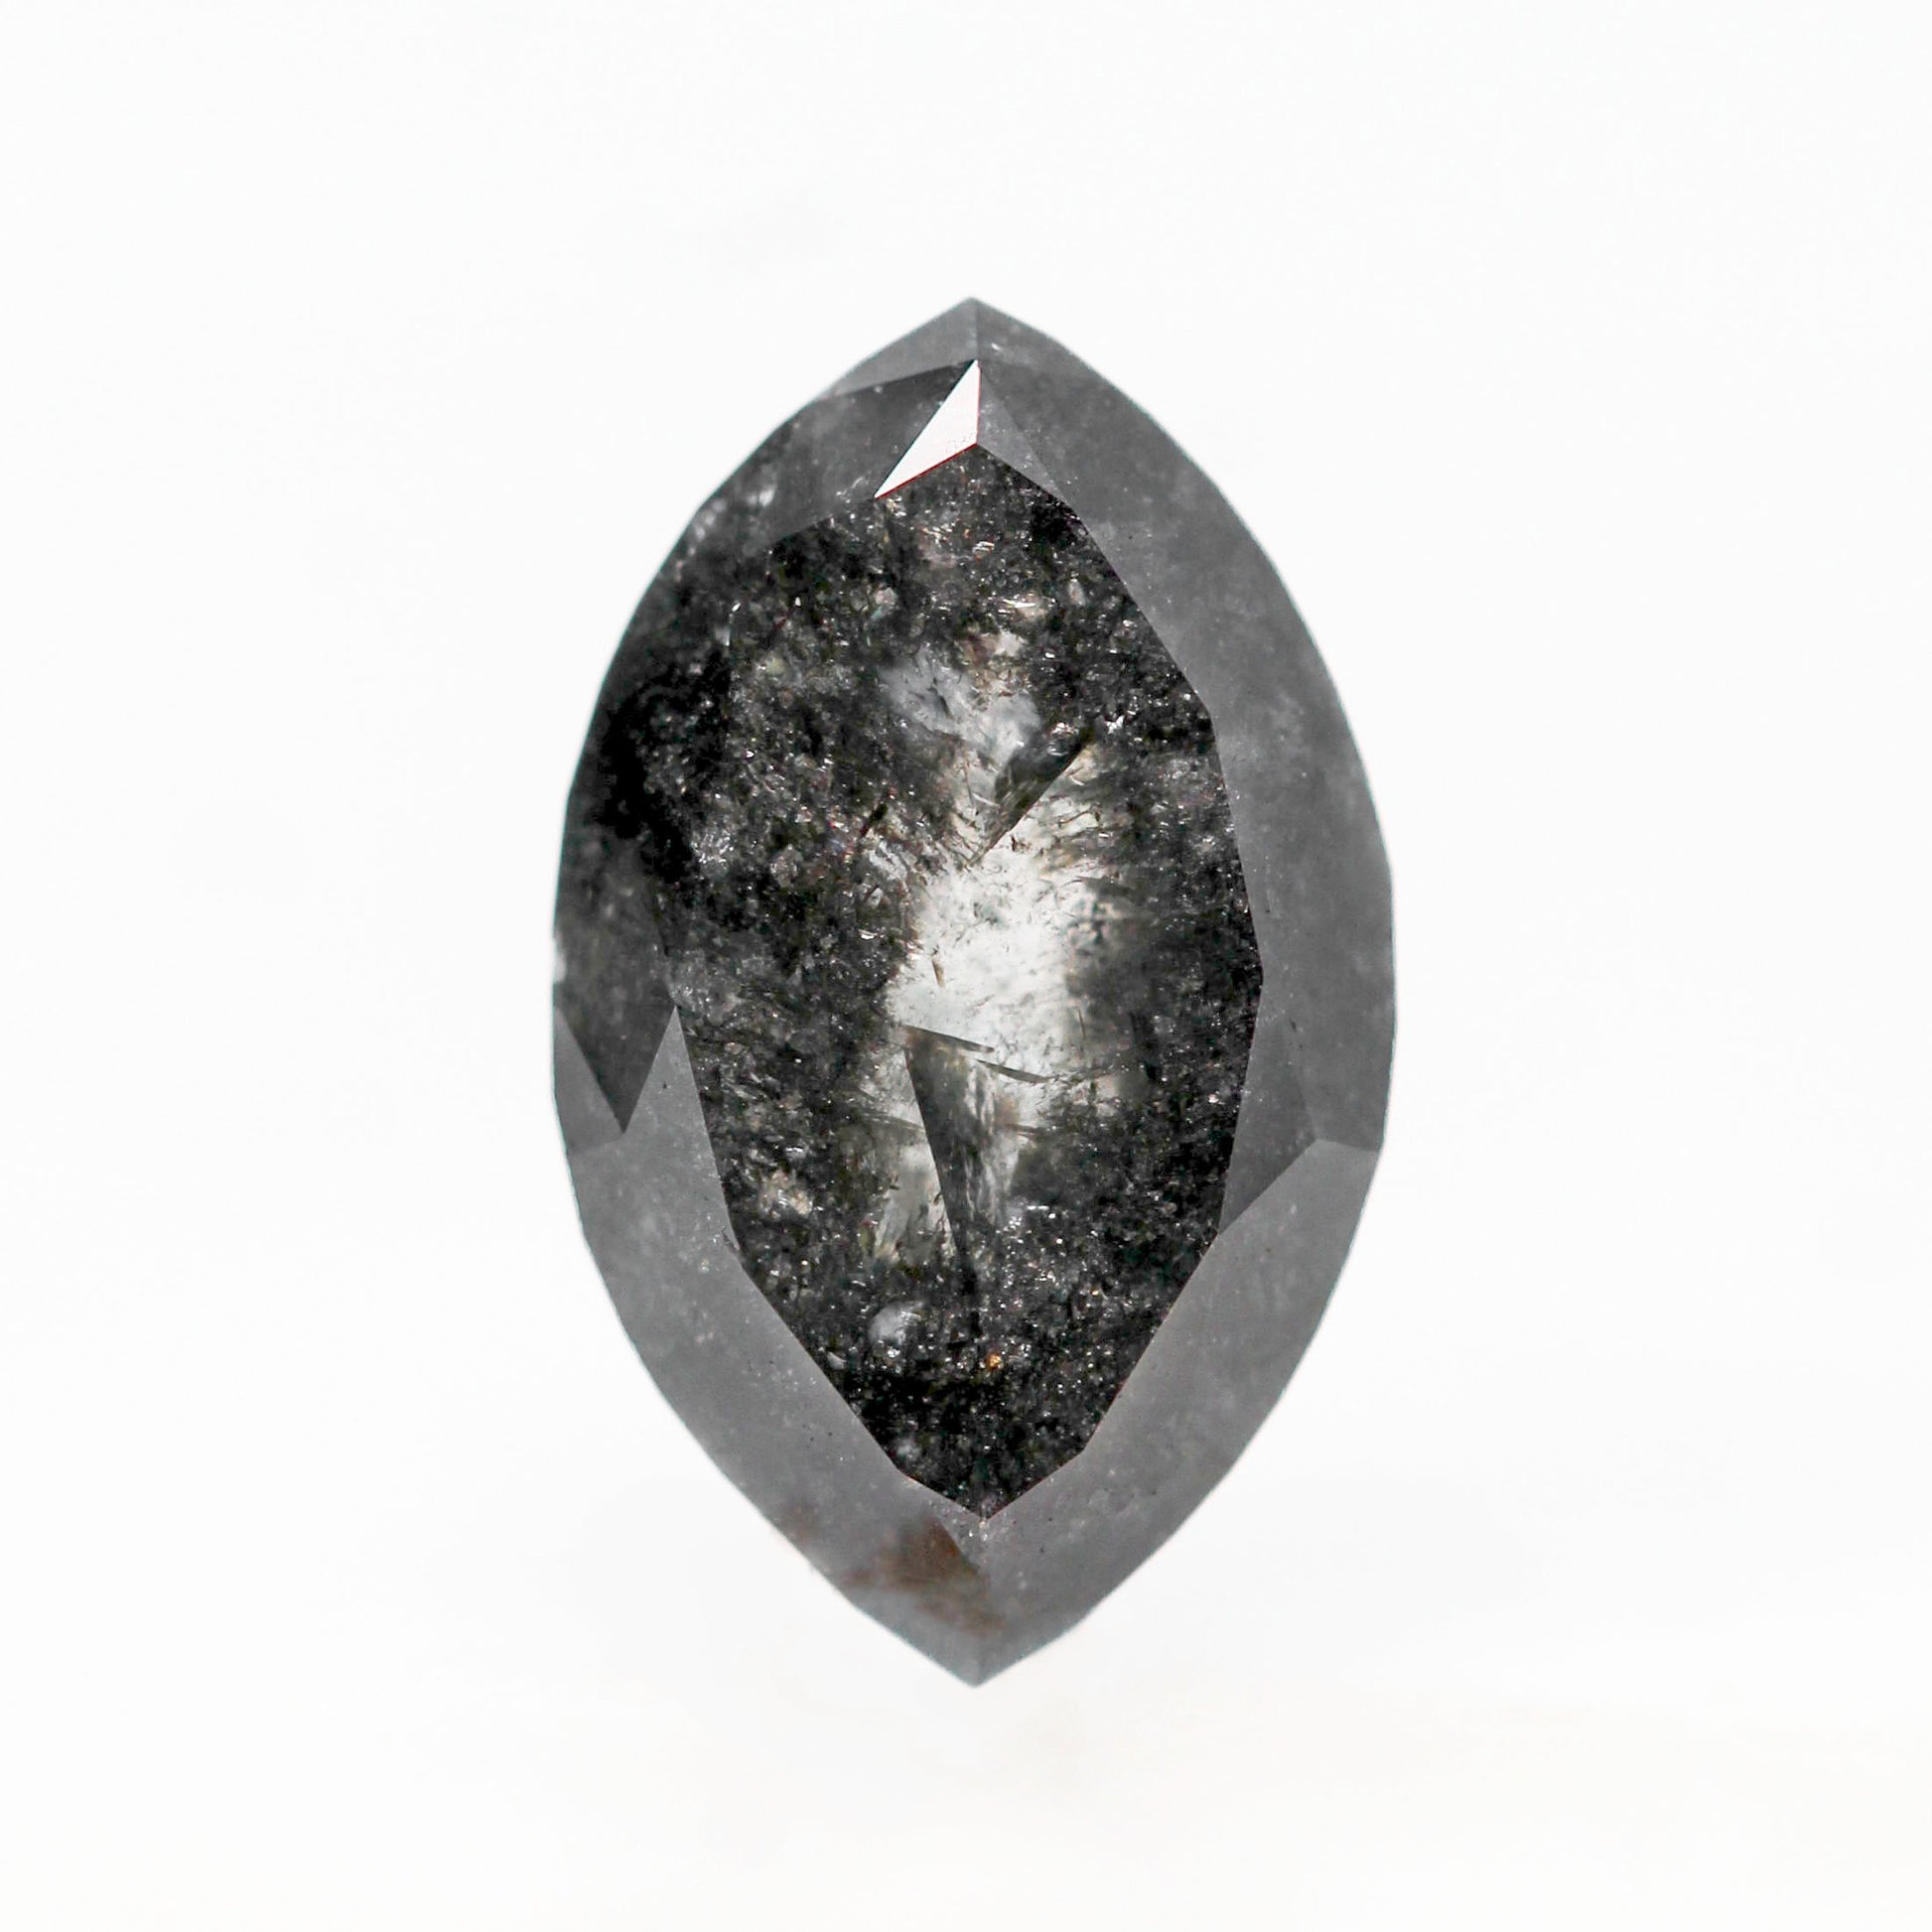 2.55 Carat Black Celestial Marquise Diamond for Custom Work - Inventory Code BCM255 - Midwinter Co. Alternative Bridal Rings and Modern Fine Jewelry